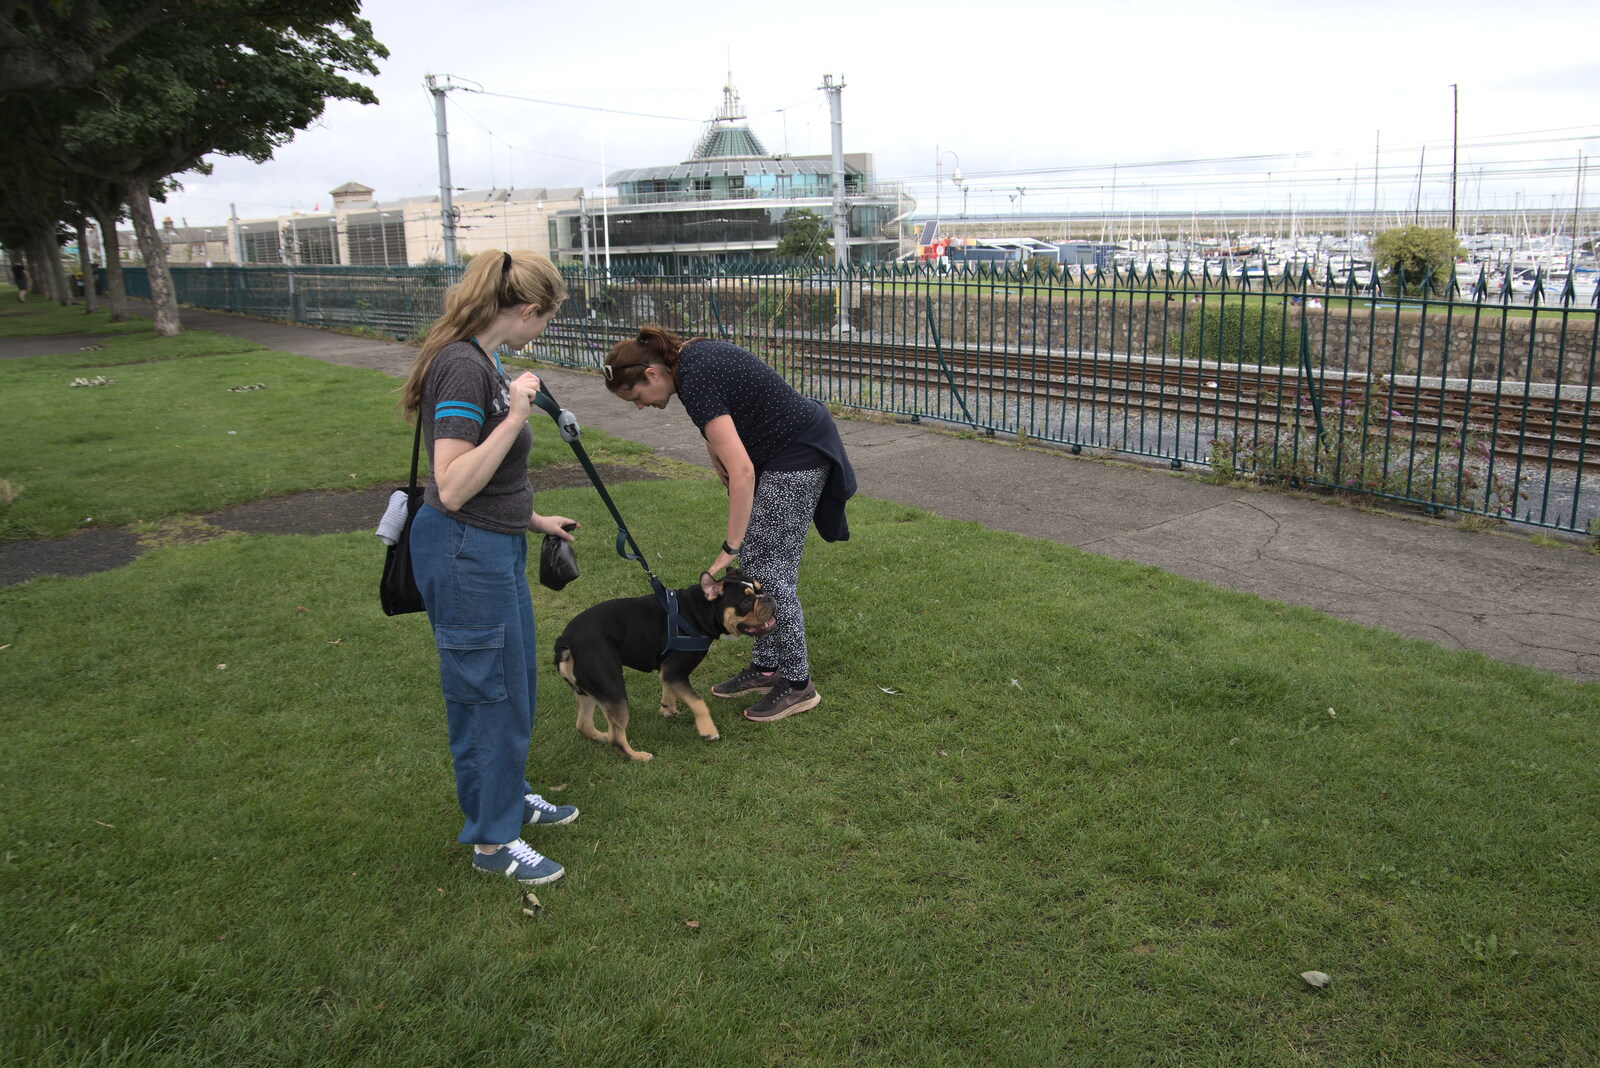 Bear gets a final scratch from Isobel from Manorhamilton and the Street Art of Dún Laoghaire, Ireland - 15th August 2021